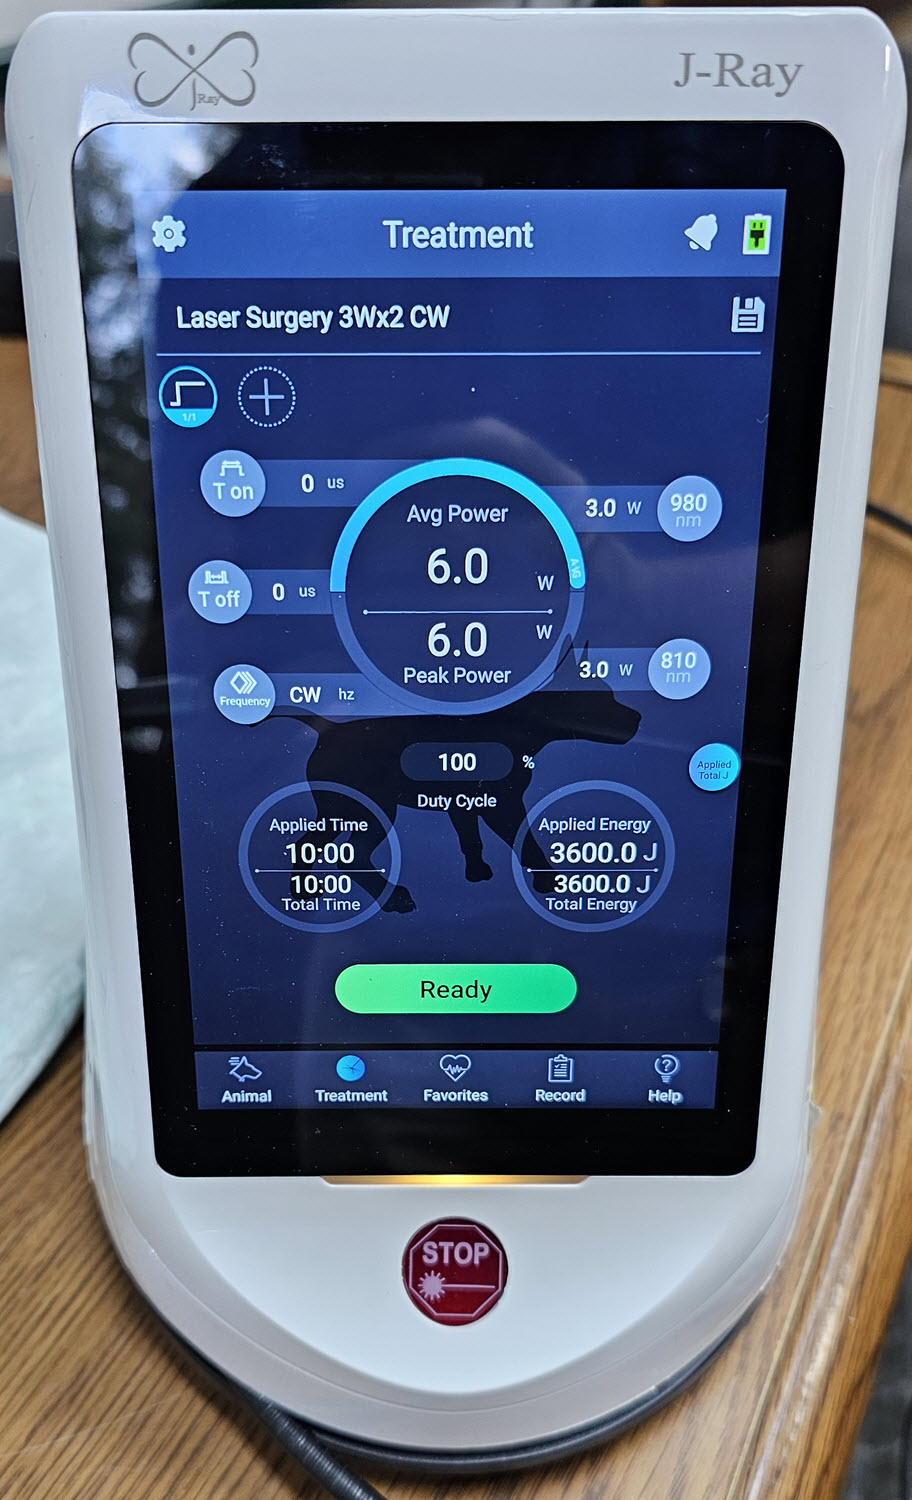 The settings on the J-Ray Laser for surgery